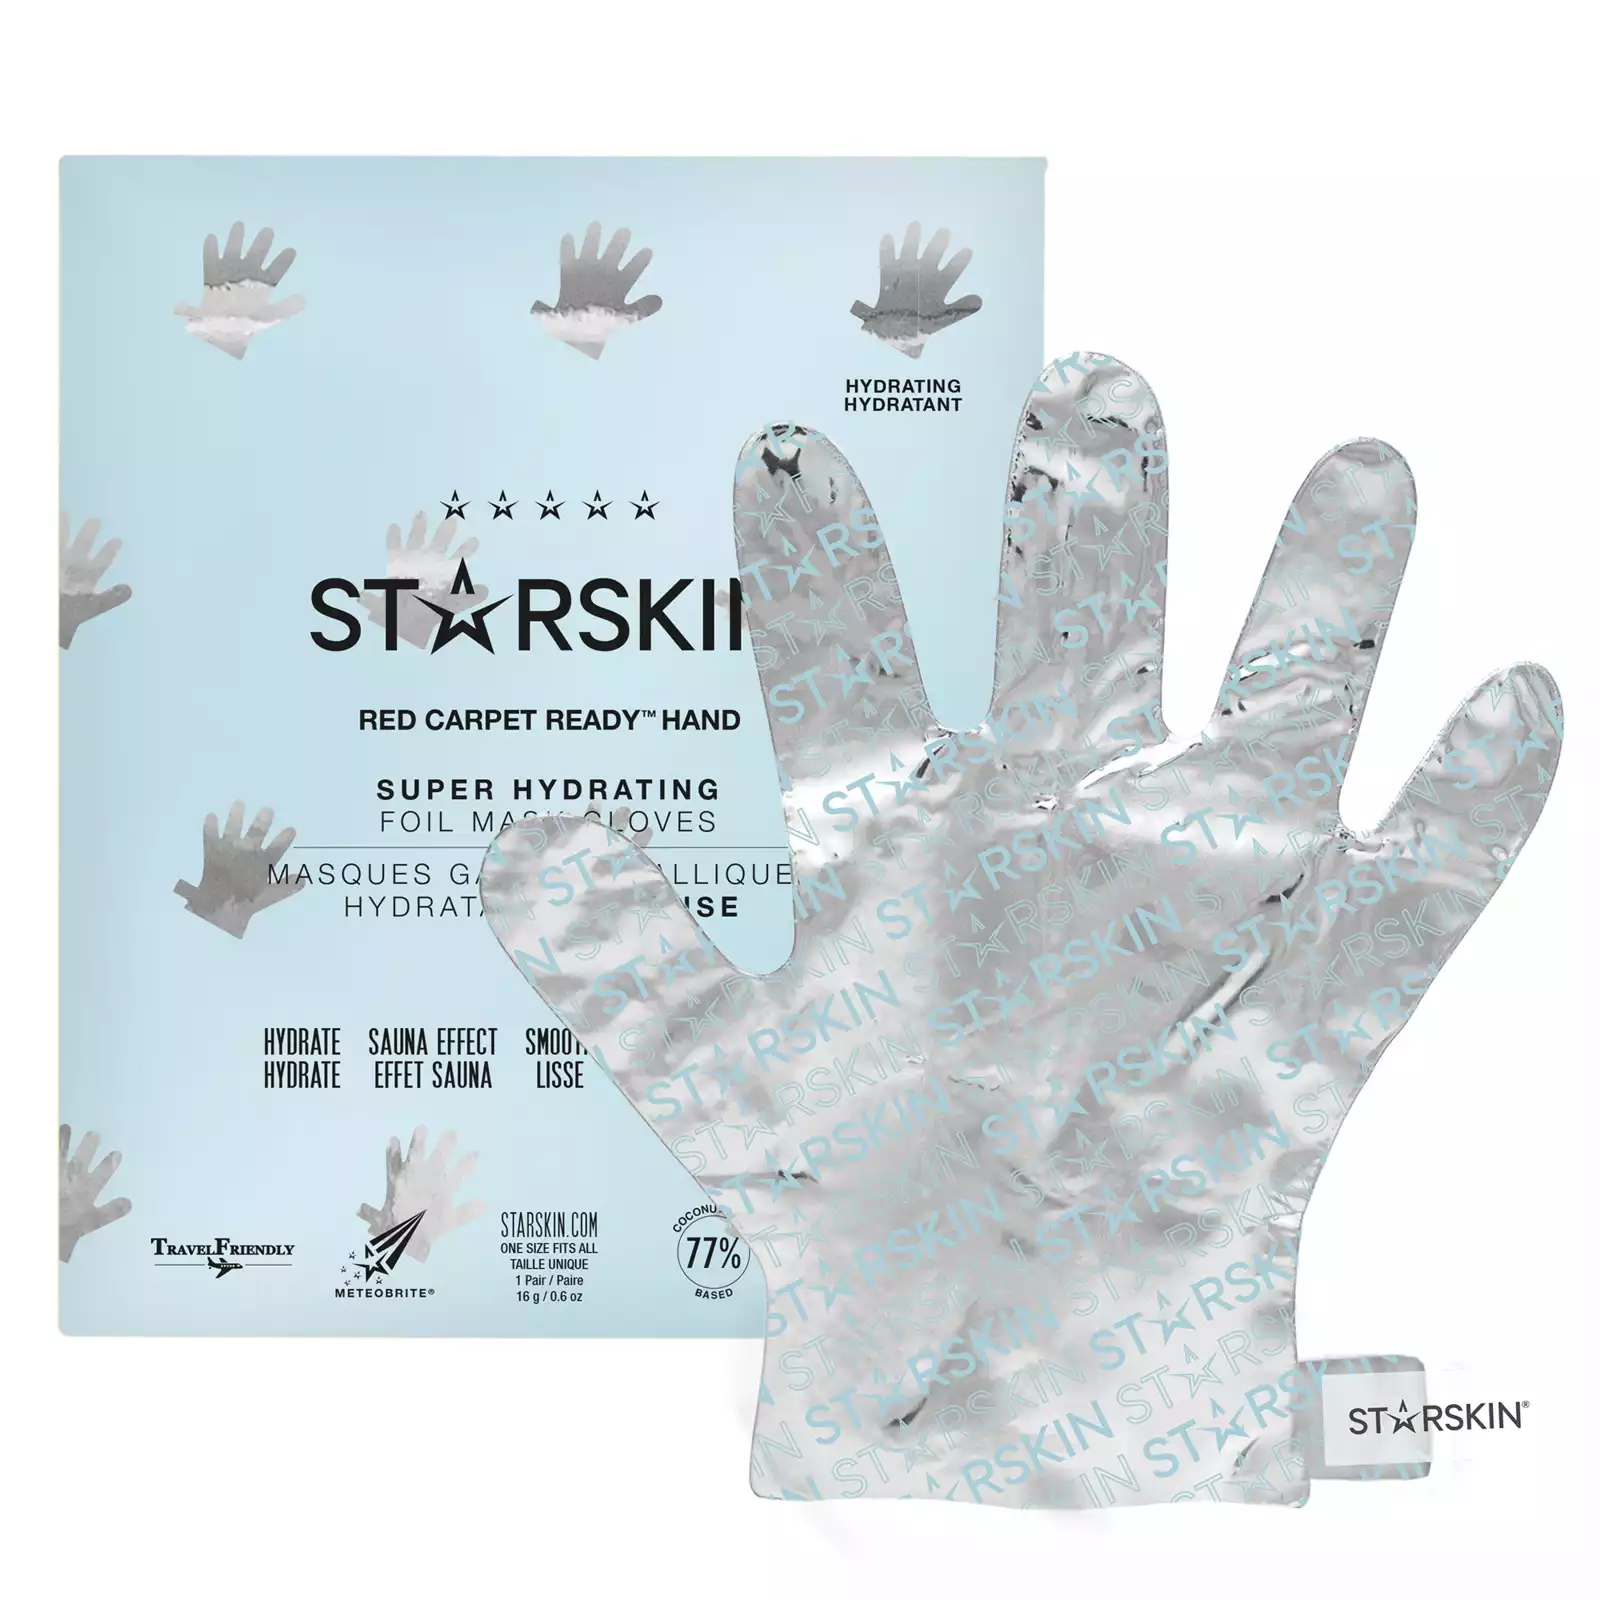 Red Carpet Ready Hand Super Hydrating Foil Mask Gloves